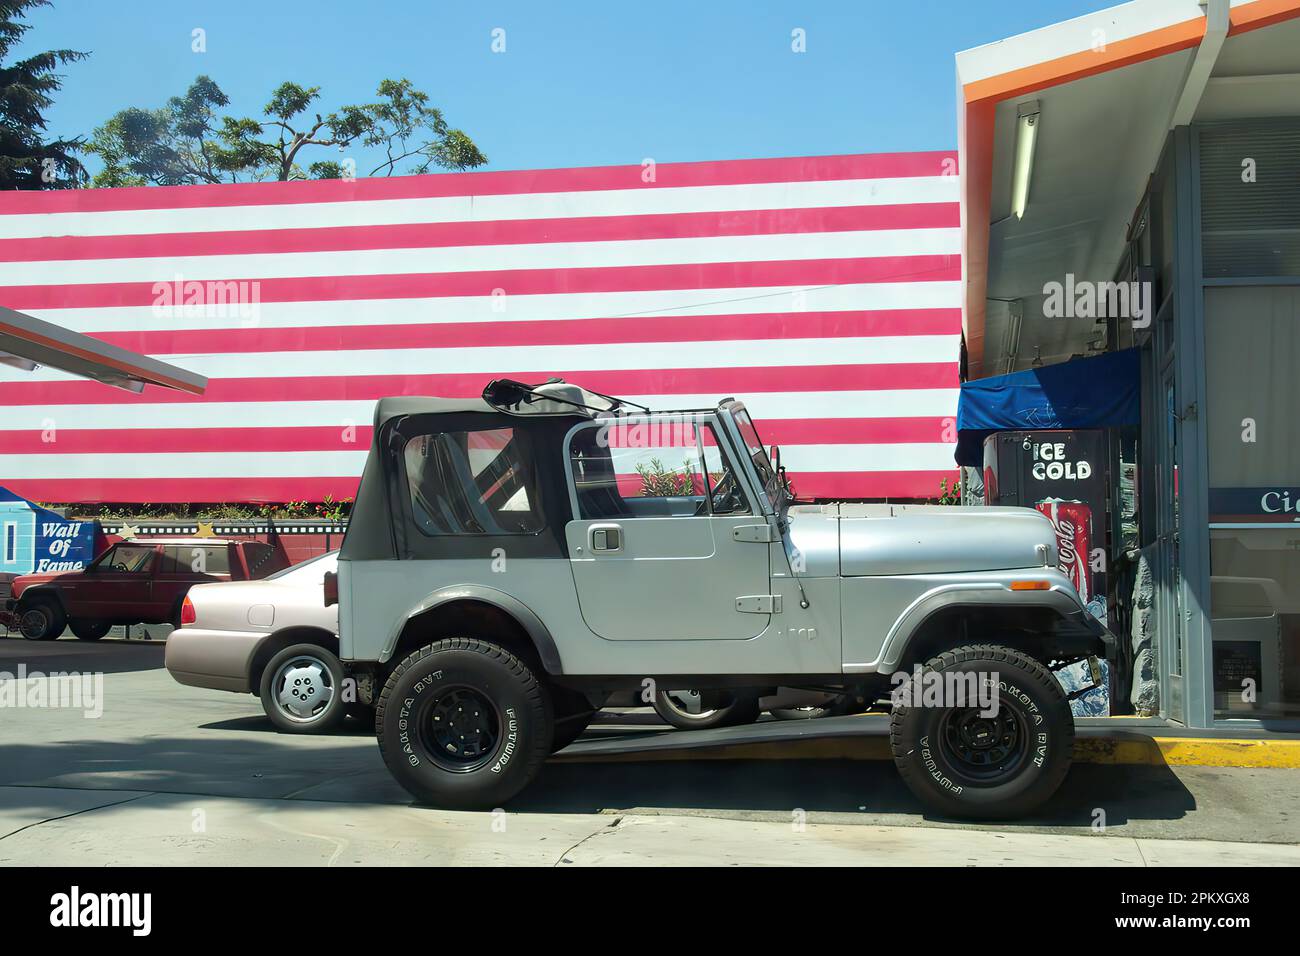 Los Angeles, California / USA, August 5, 2004: Gray Jeep Wrangler parked at a gas station in Los Angeles with a large American flag in the background. Stock Photo